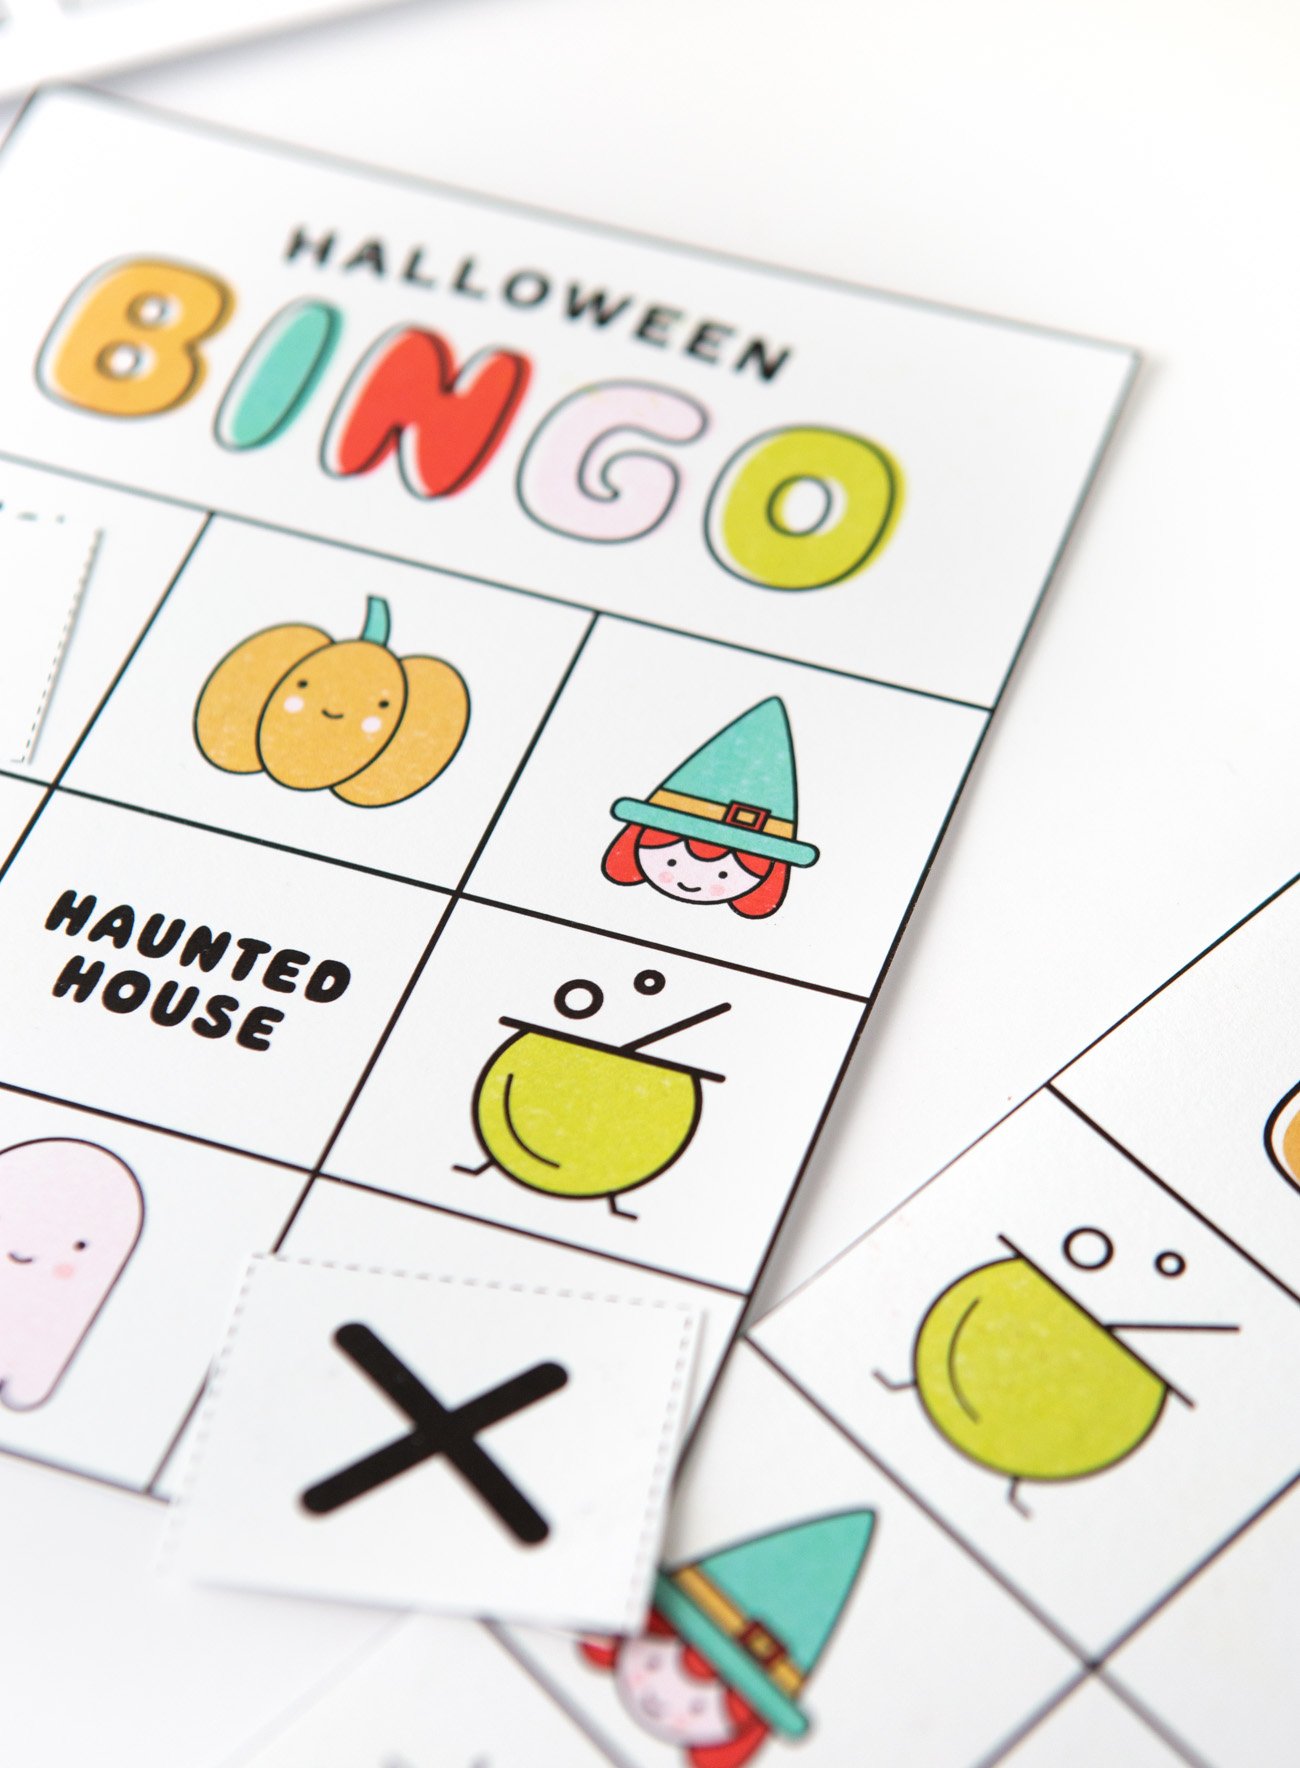 Colorful free printable Halloween bingo cards with icons and pictures: pumpkin, witch, lollipop, cauldron, spider, ghost